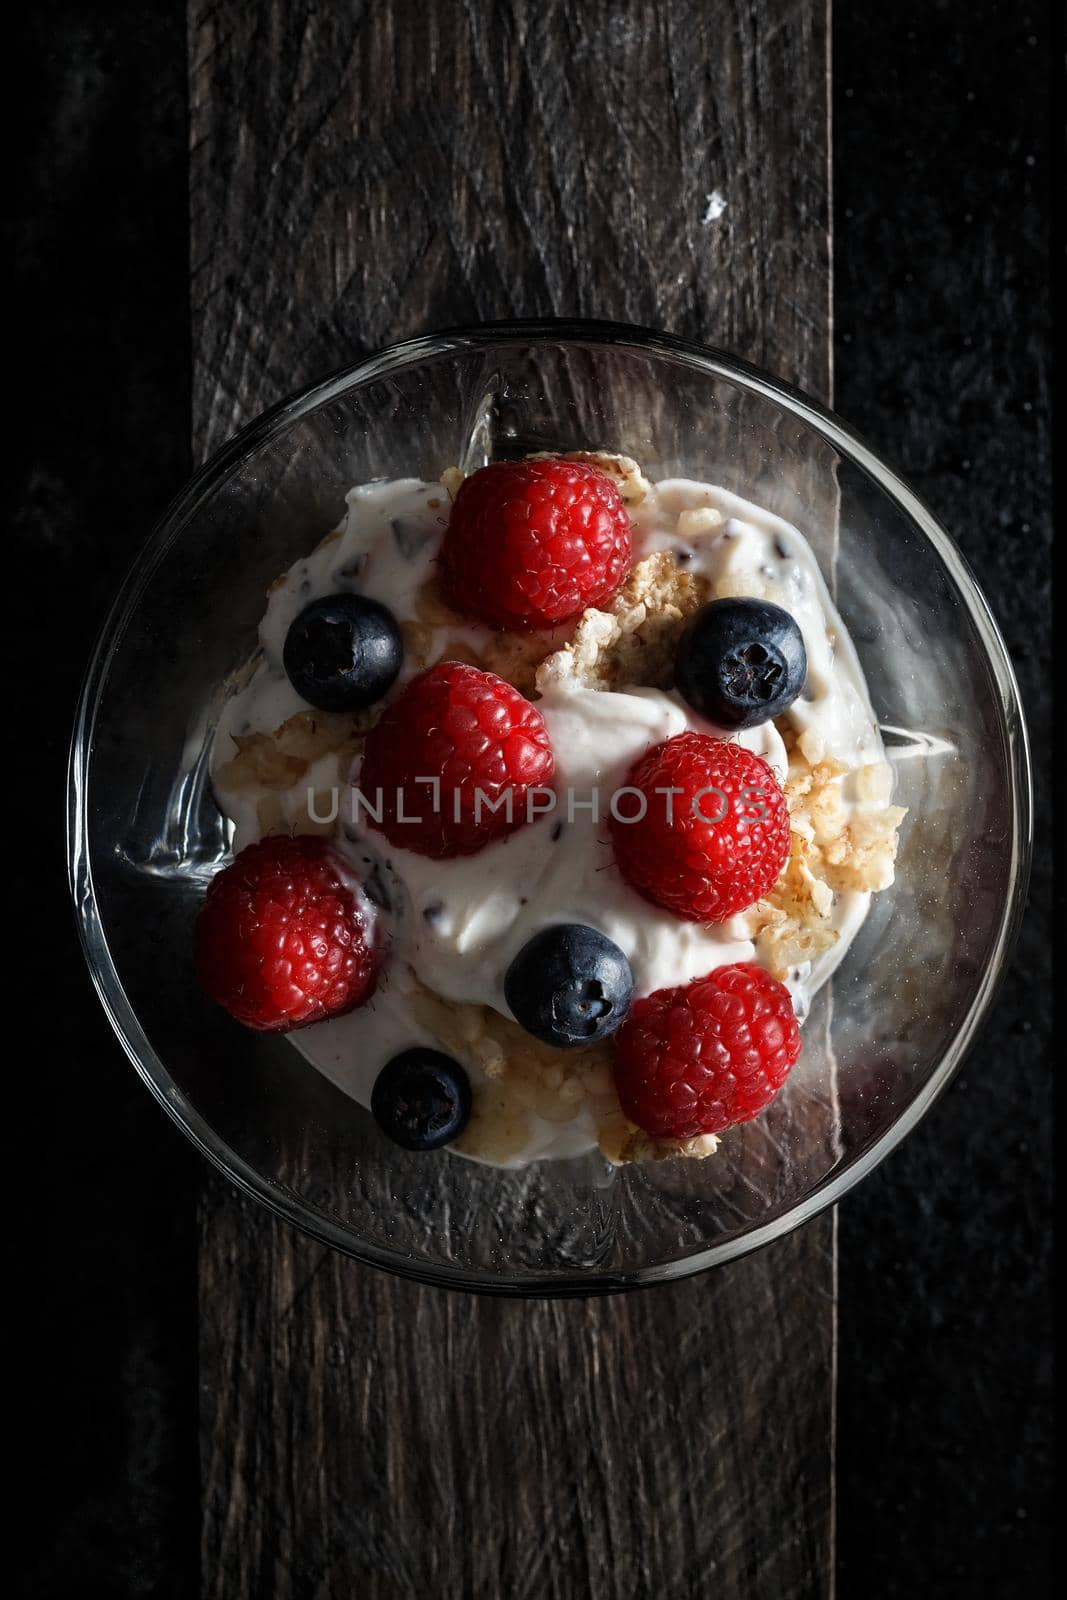 Raspberries, blueberries, cereals and yogurt in a glass bowl on old wooden boards. Healthy breakfast for a healthy life. Vertical image view from above.